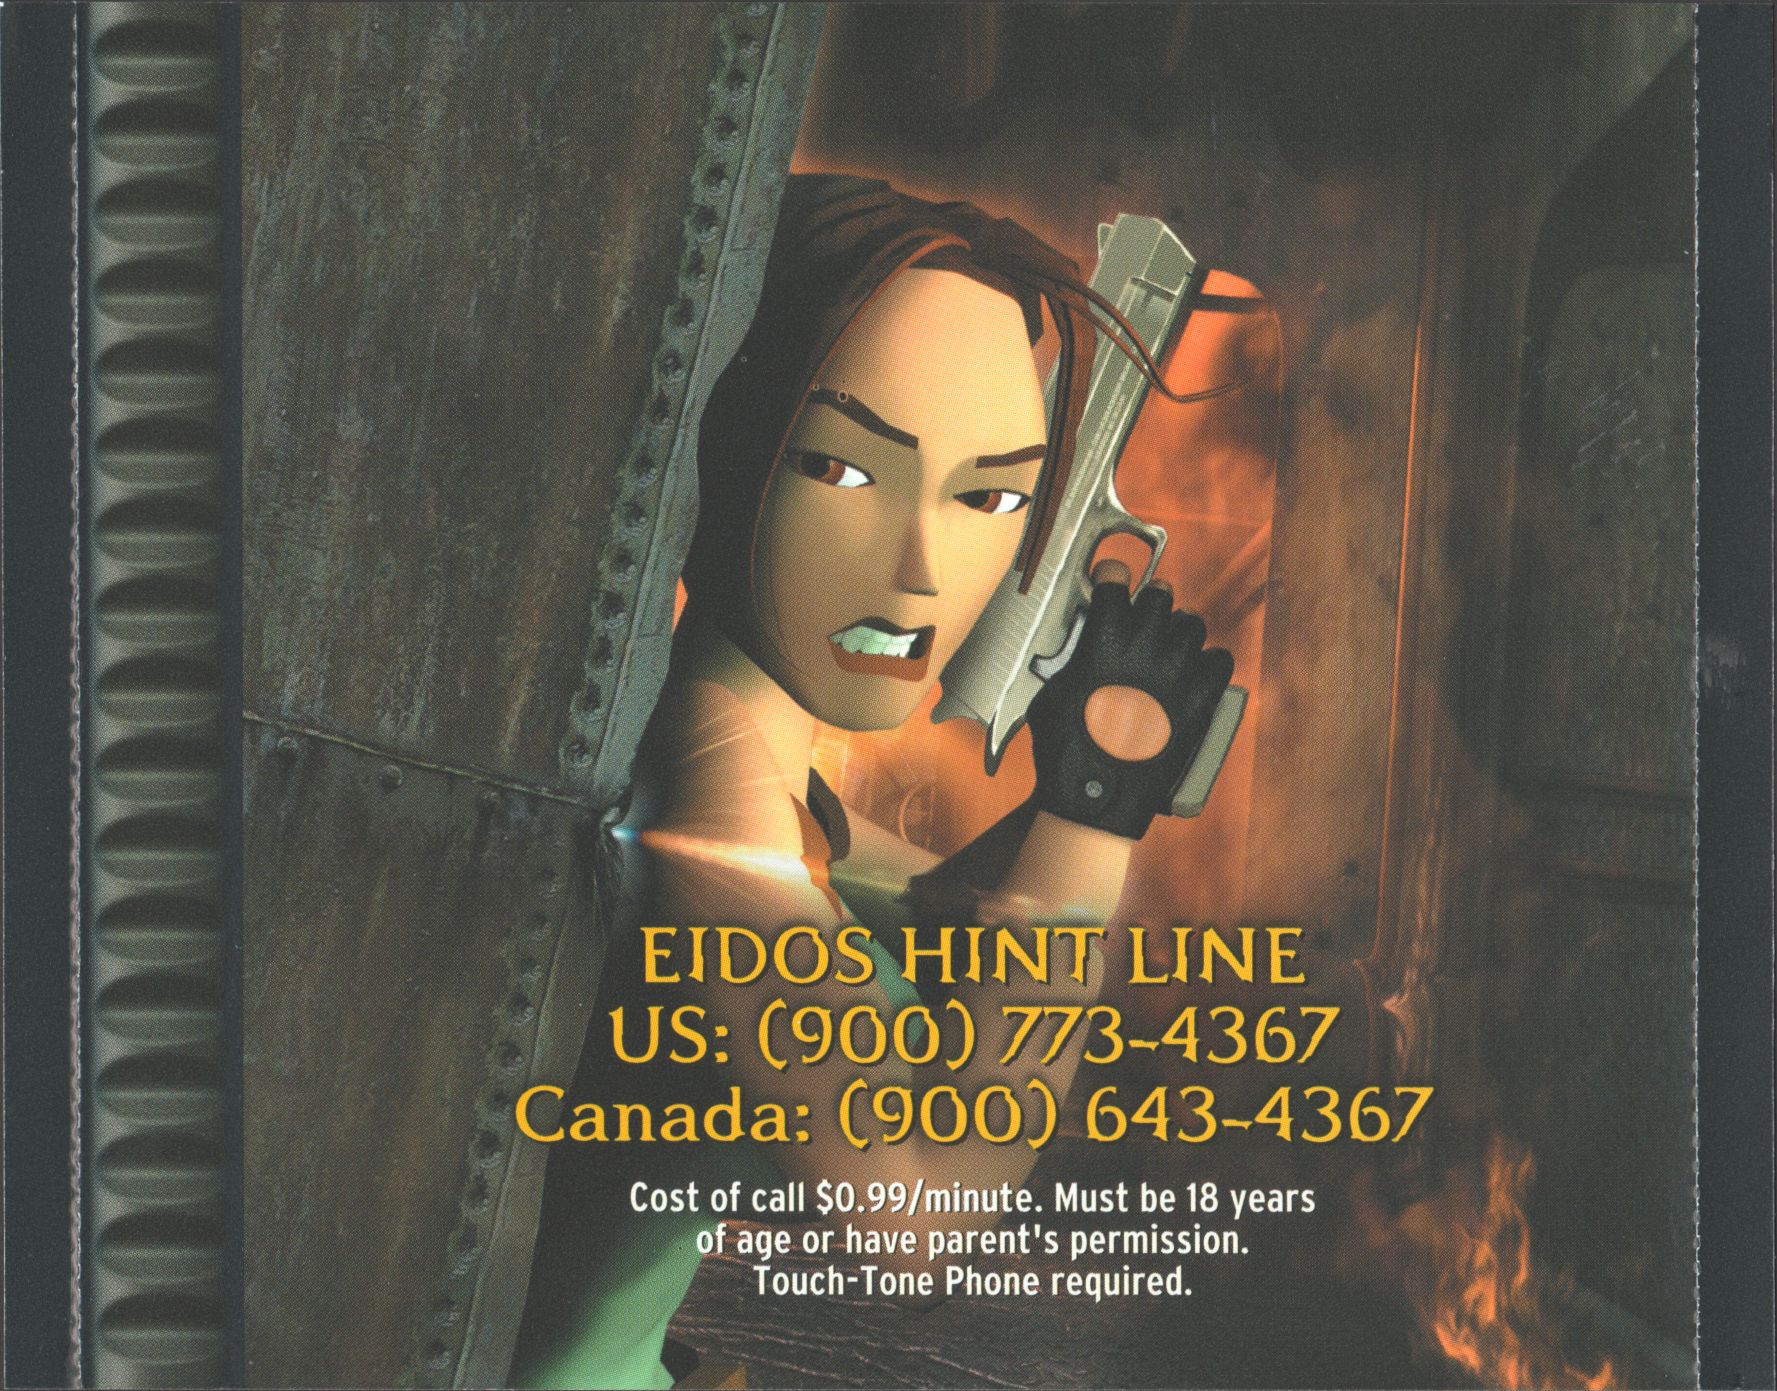 tomb raider 5 chronicles download free